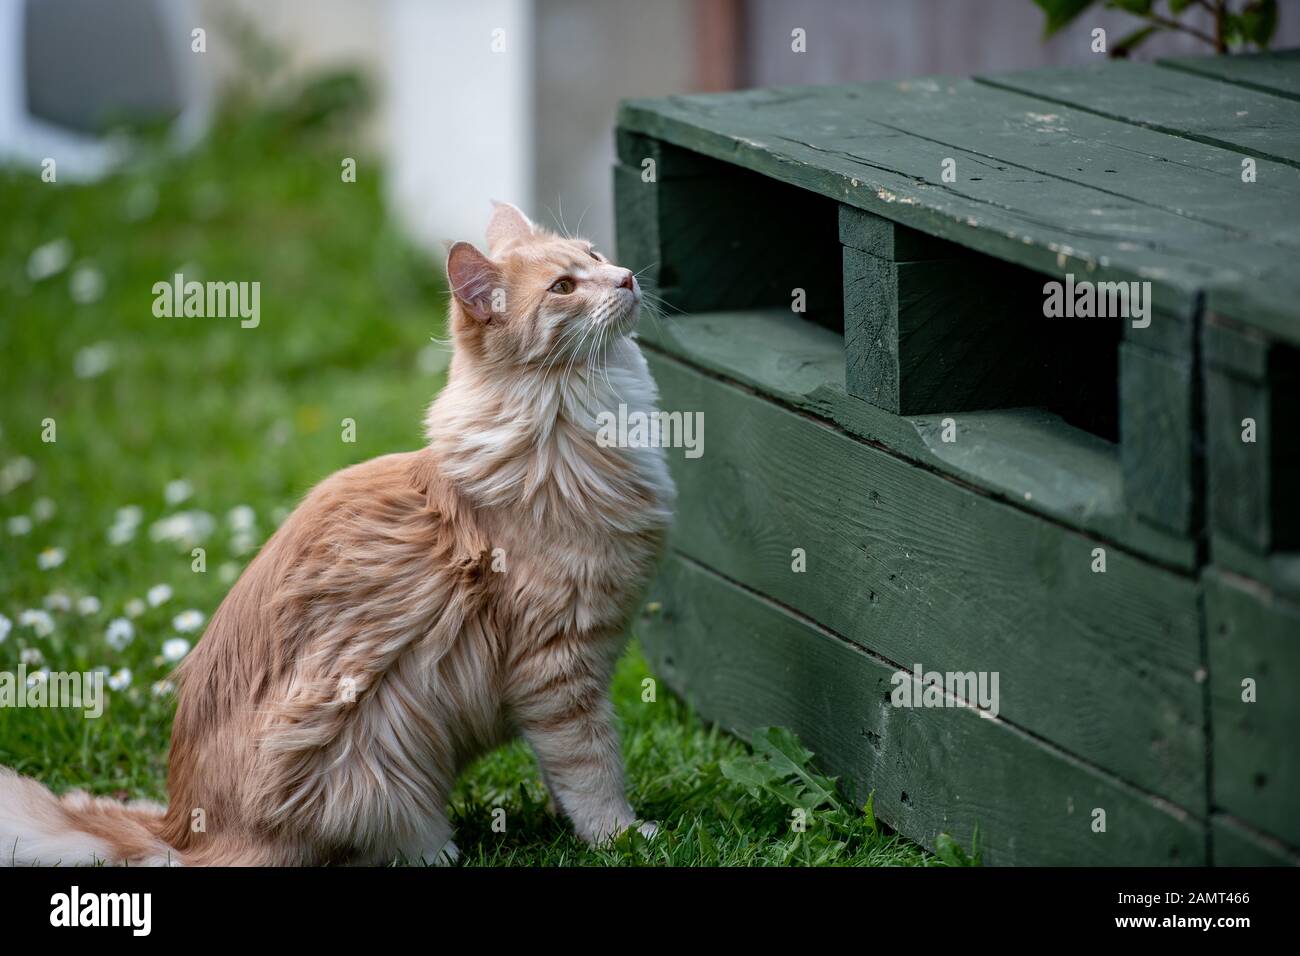 Maine Coon cat sitting in a garden Stock Photo